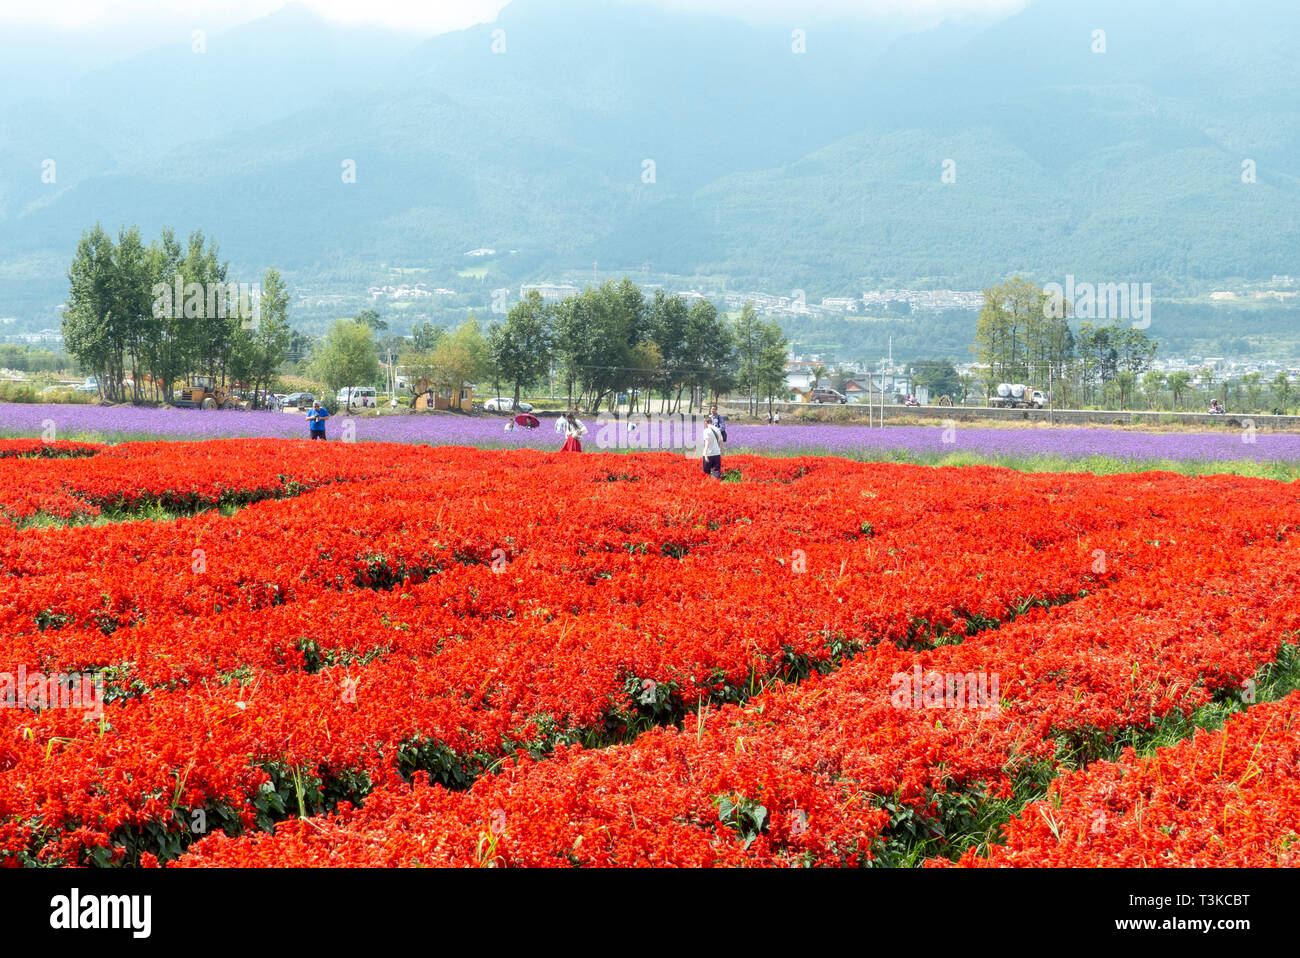 A field of red flowers in Dali, Yunnan, China Stock Photo